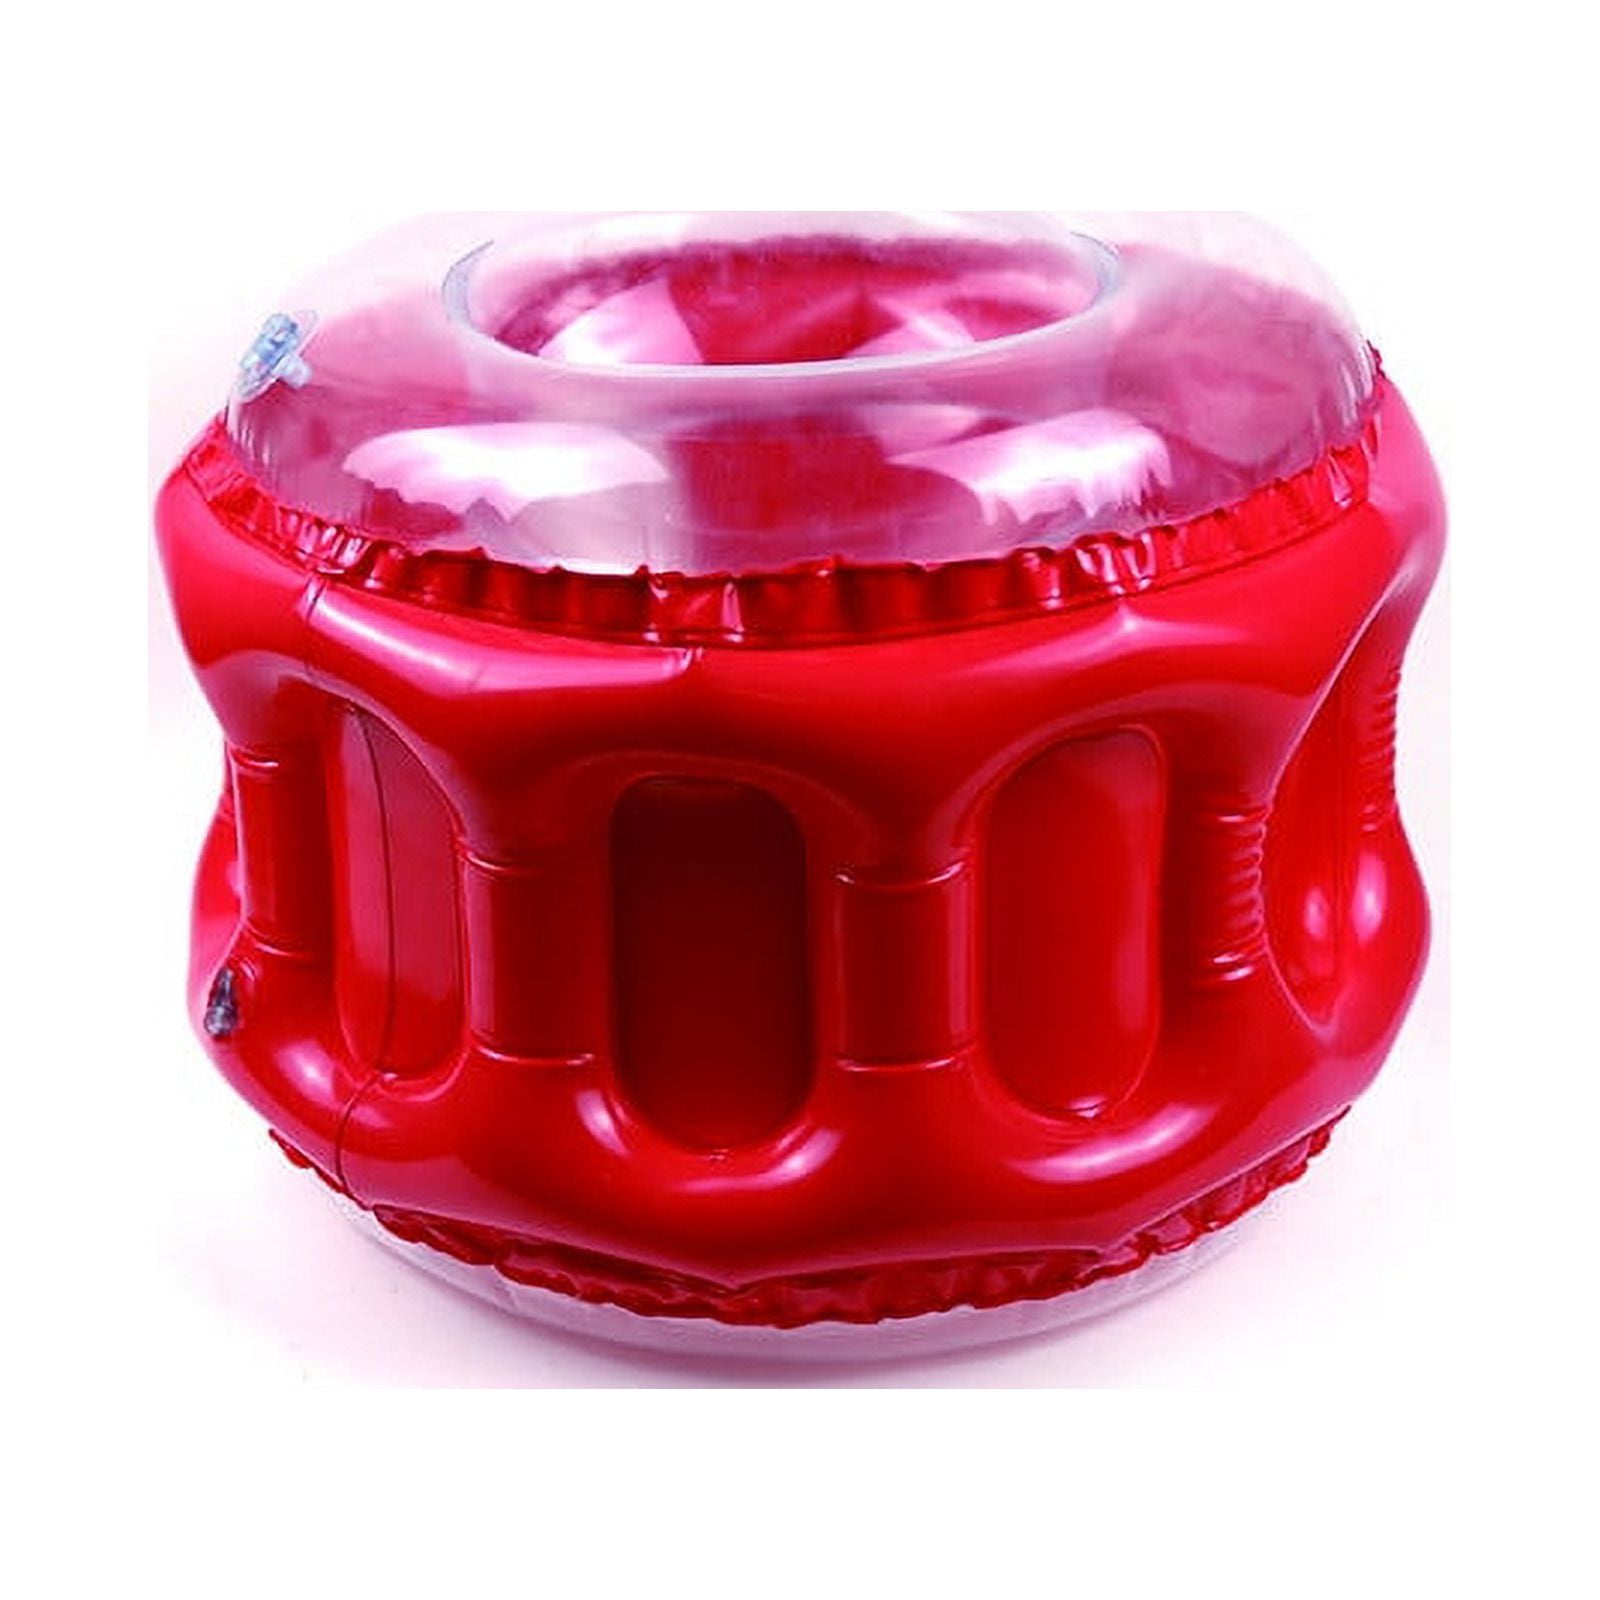 TUTUnaumb New Hot Sale For Controller Rage Quit Protector Inflatable  Contraption Protects Gamesfor Home Household-Red 